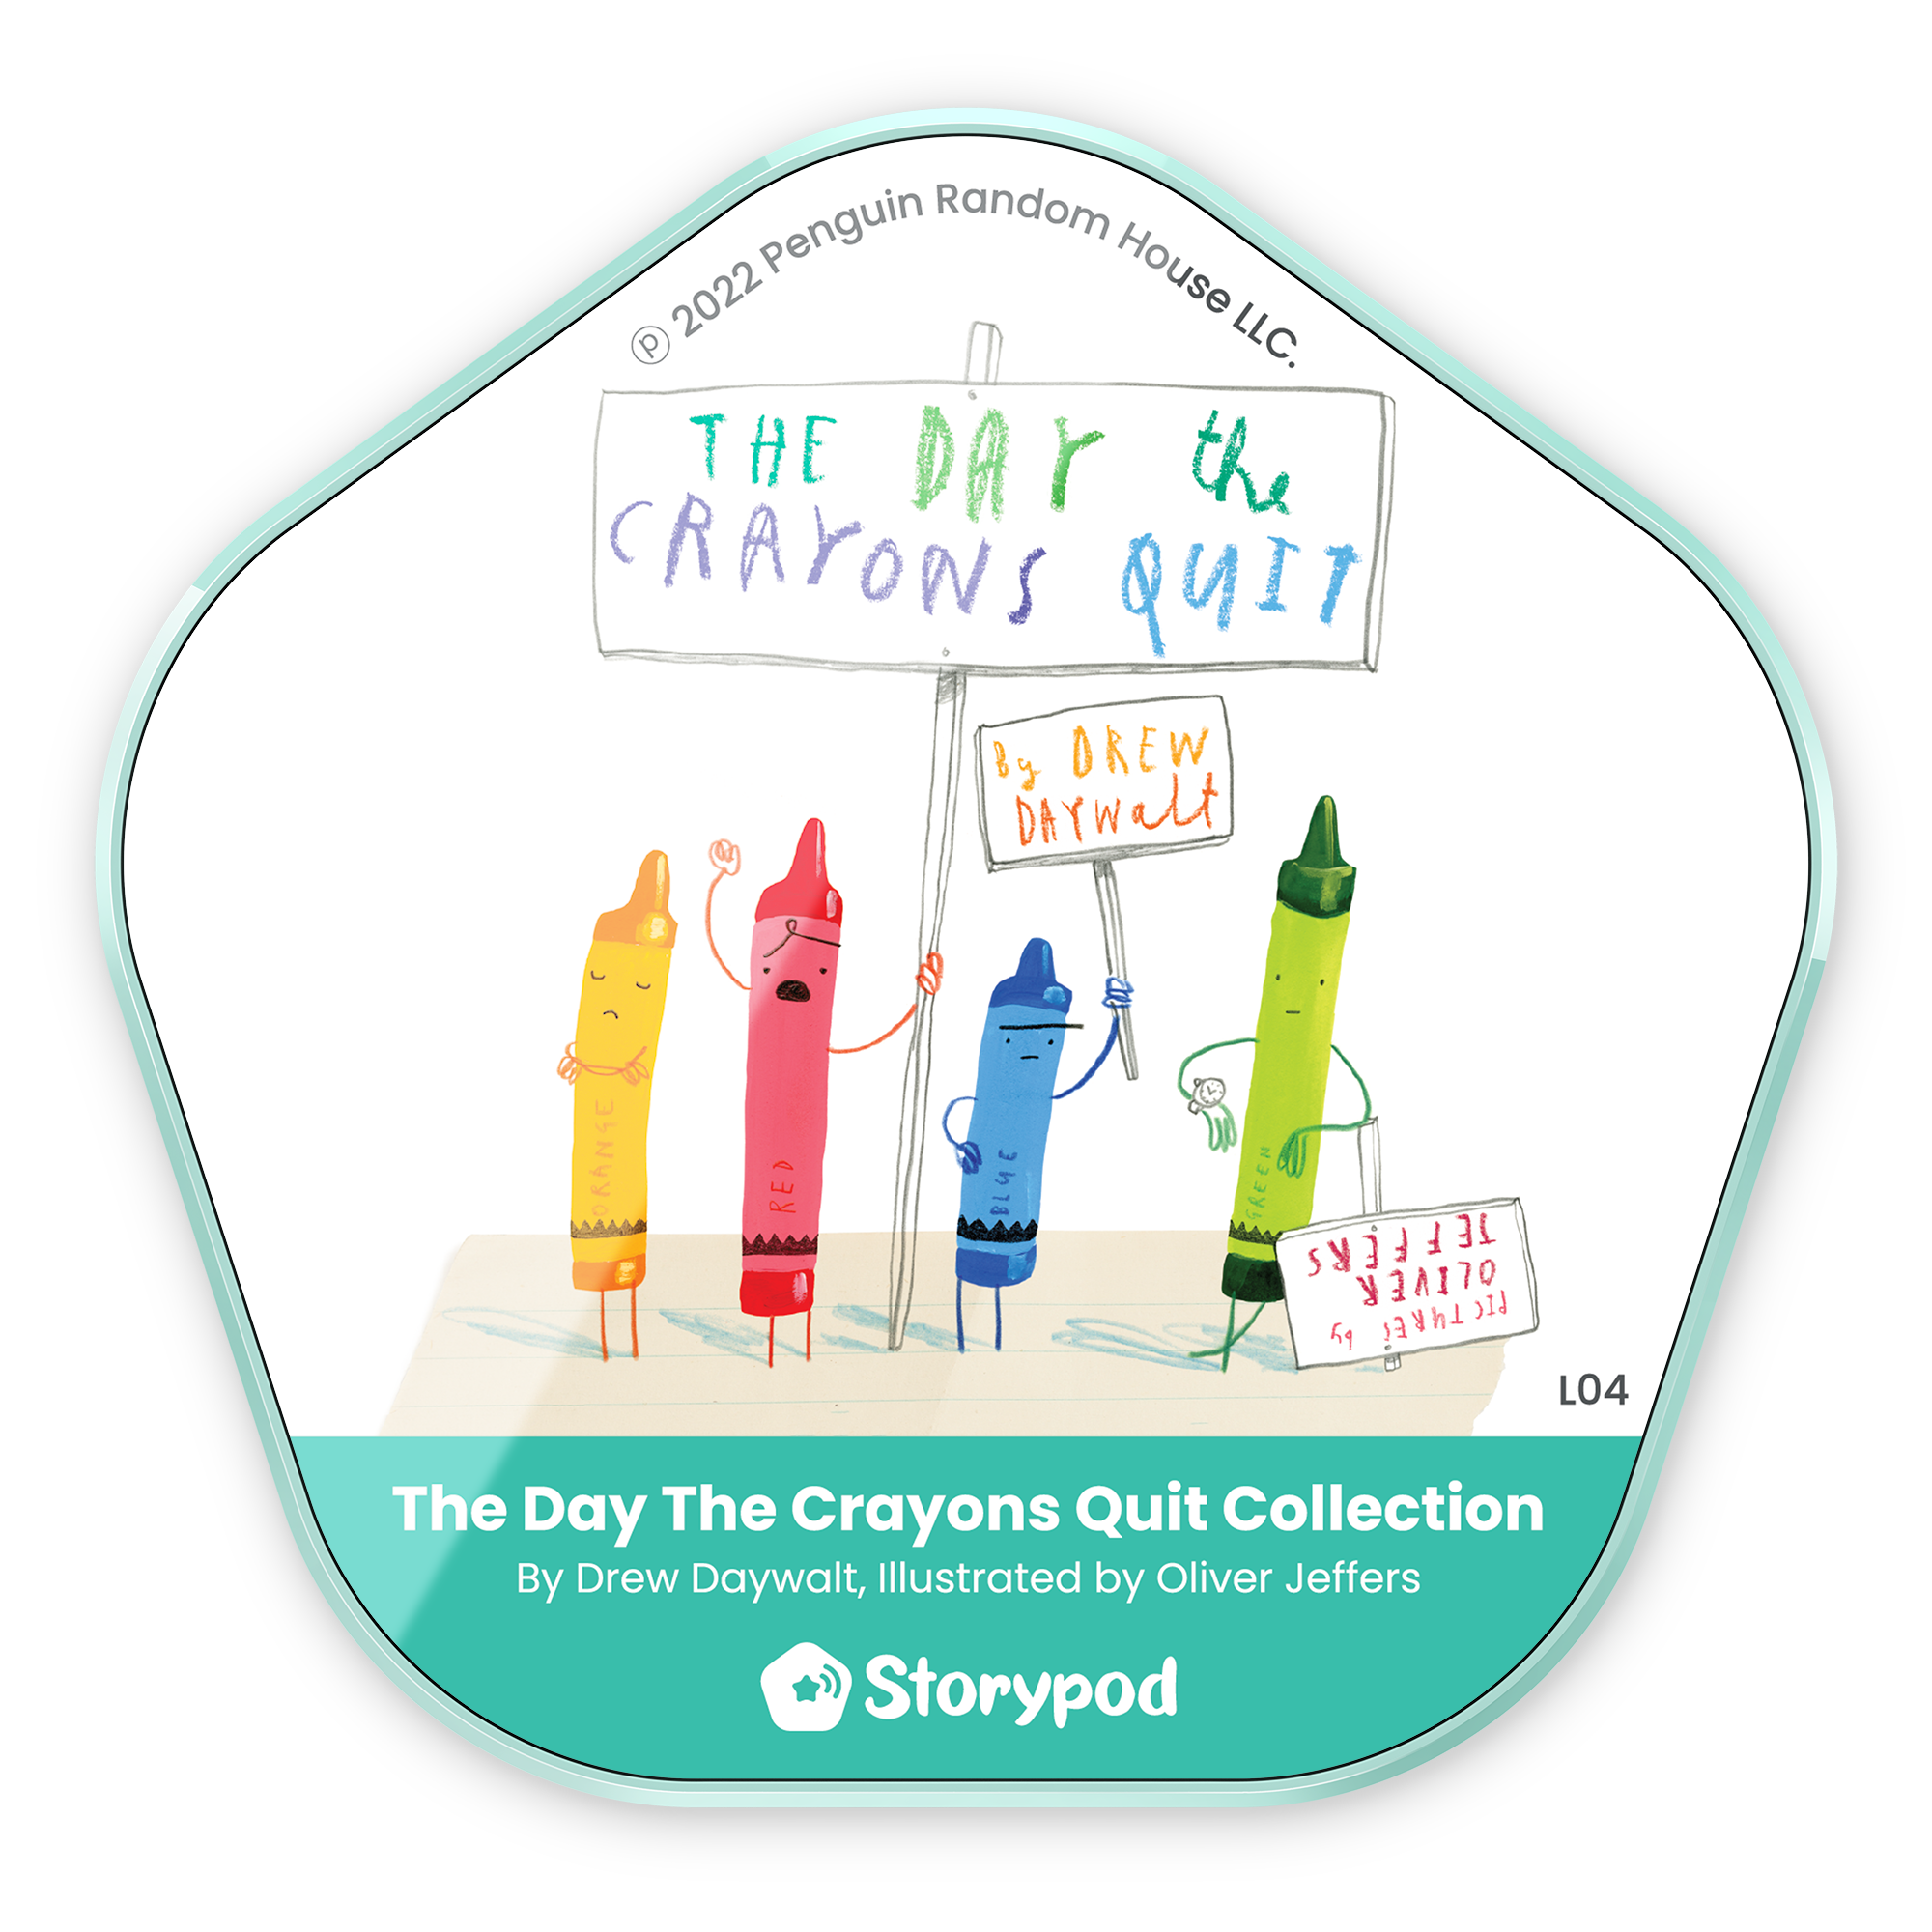 The Day The Crayons Quit Collection